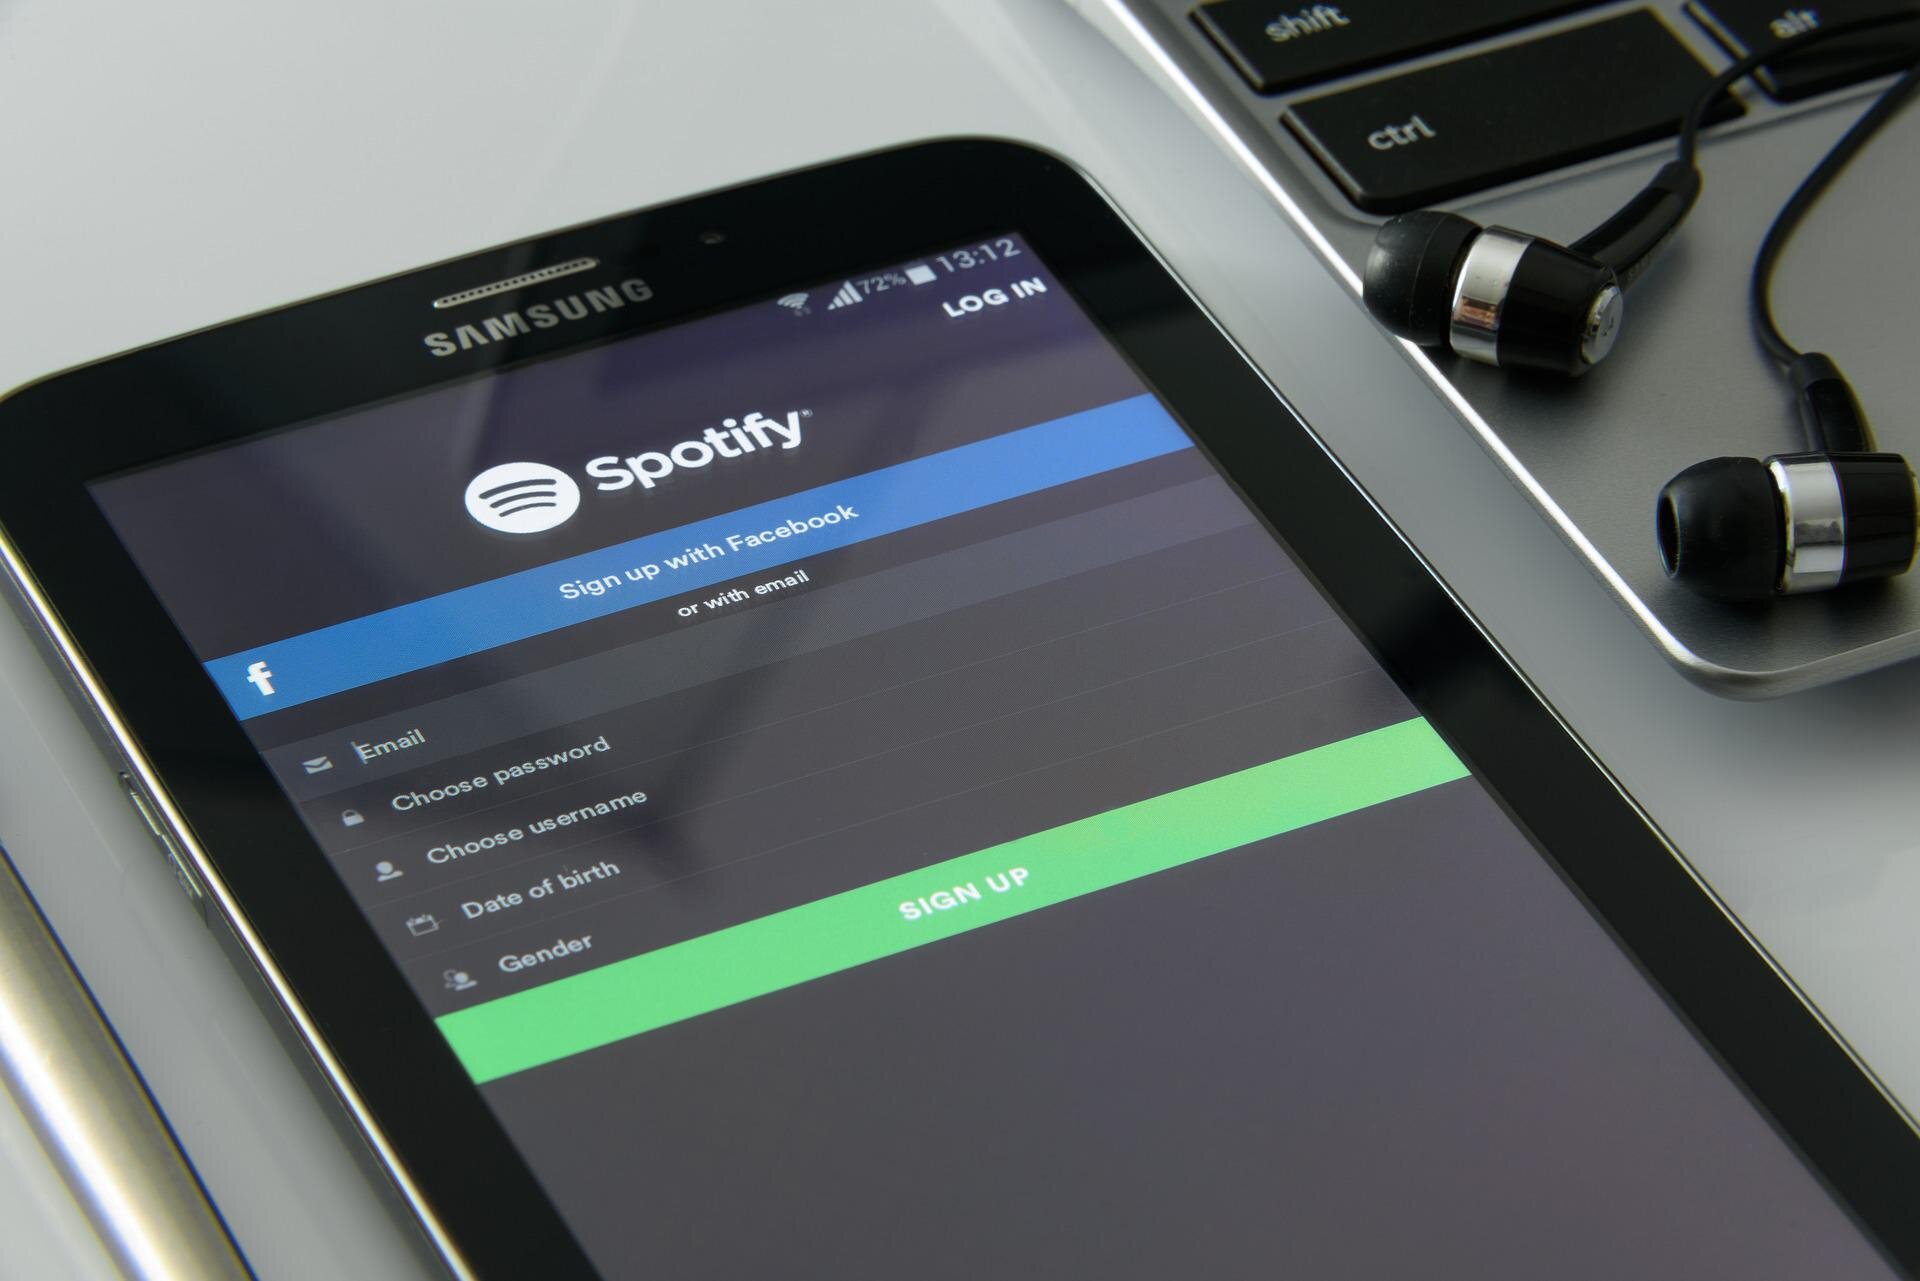 Spotify launches audiobook store with some 300,000 titles